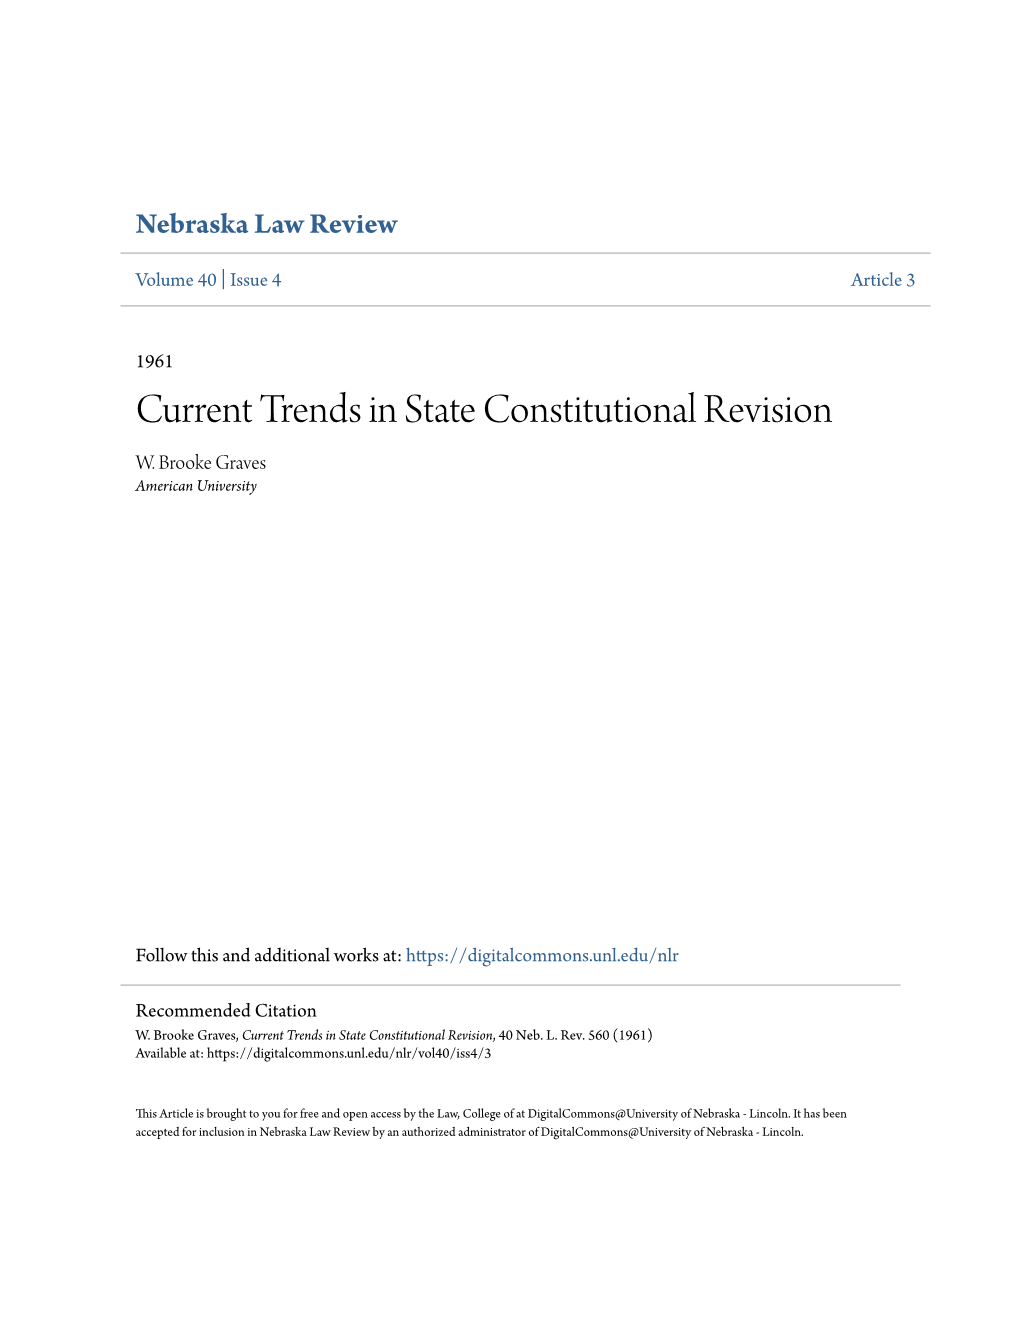 Current Trends in State Constitutional Revision W